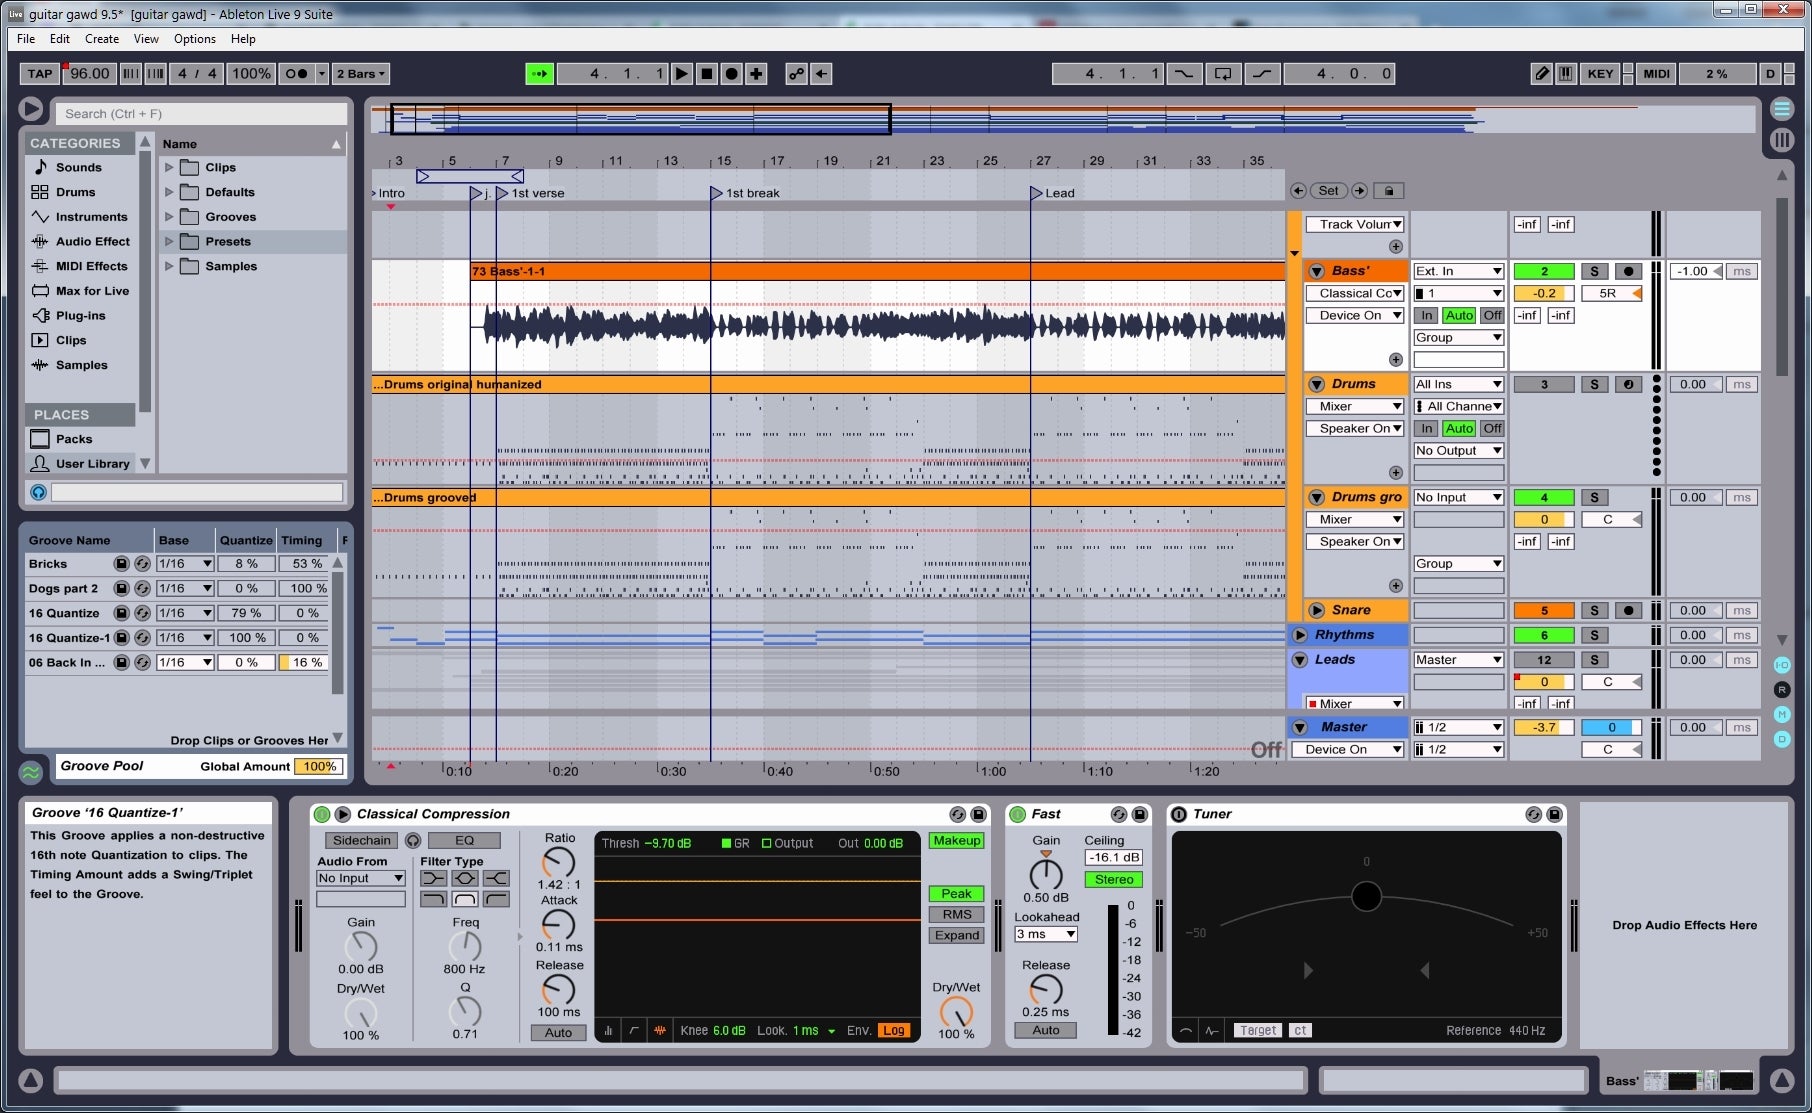 student discount ableton live